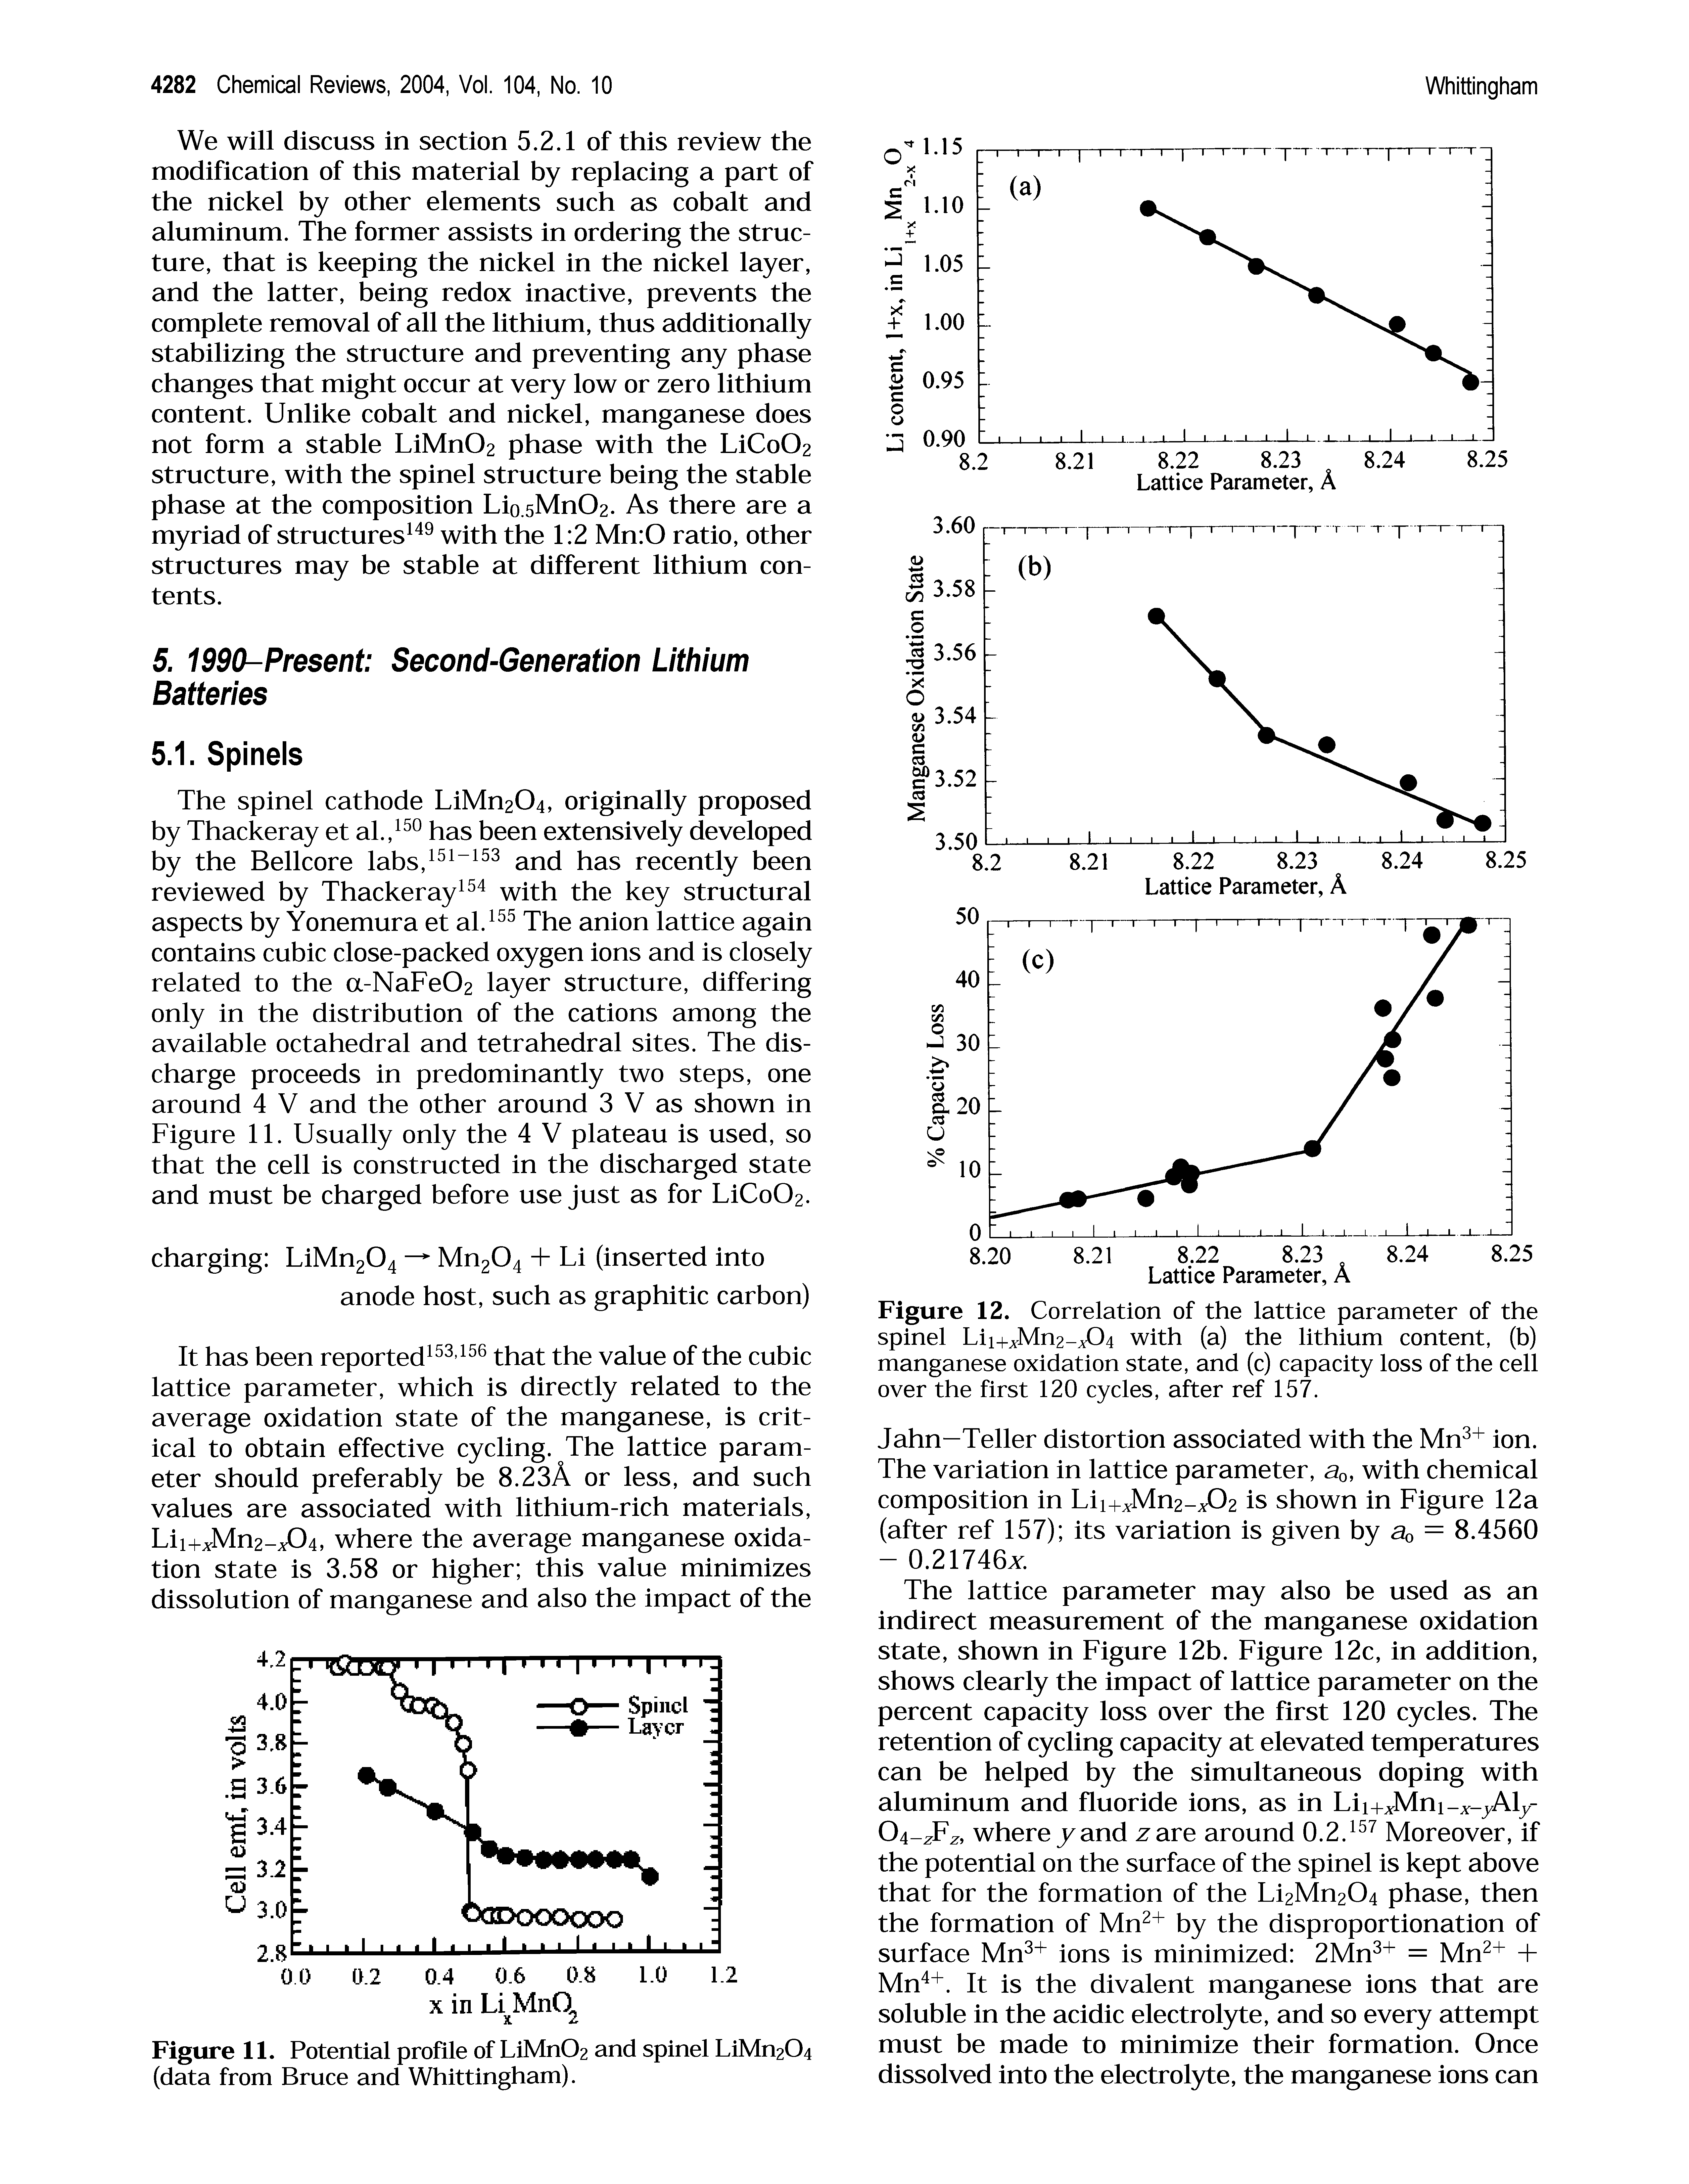 Figure 12. Correlation of the lattice parameter of the spinel Lii+JV[n2-/)4 with (a) the lithium content, (b) manganese oxidation state, and (c) capacity loss of the cell over the first 120 cycles, after ref 157.